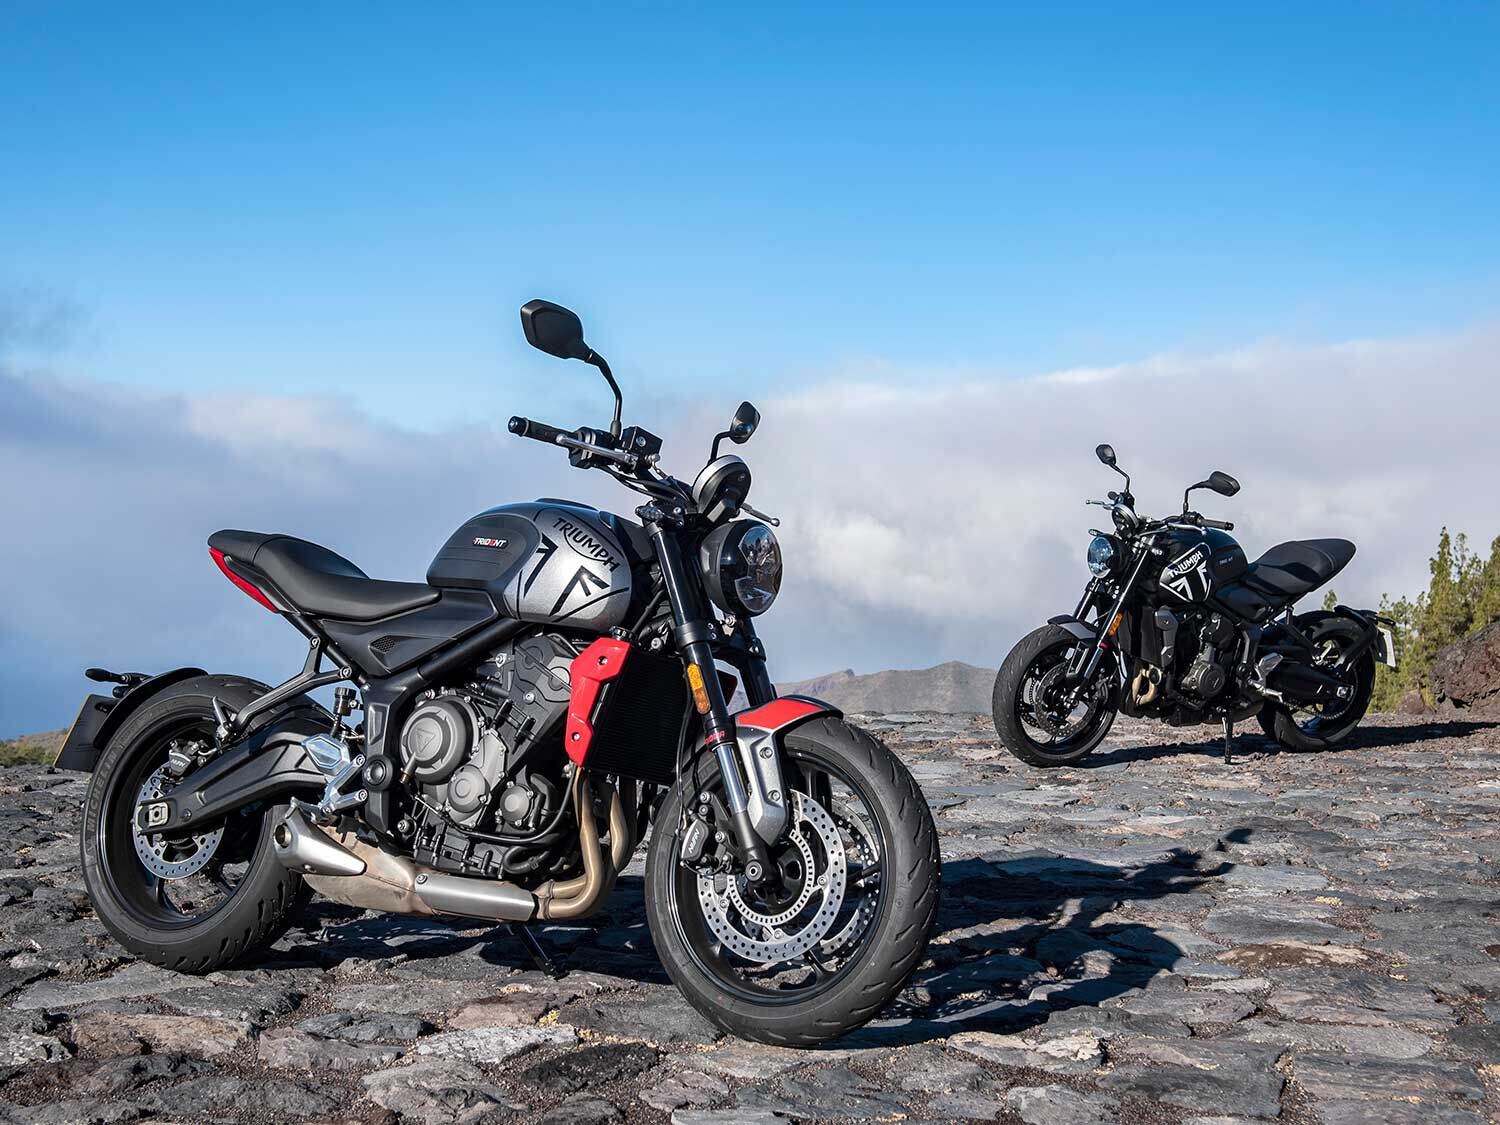 The Showa suspension lacks adjustability but 99 percent of riders won’t feel the need to twiddle anything, and there is all-important rear preload adjustment for when you are adding a pillion or luggage.